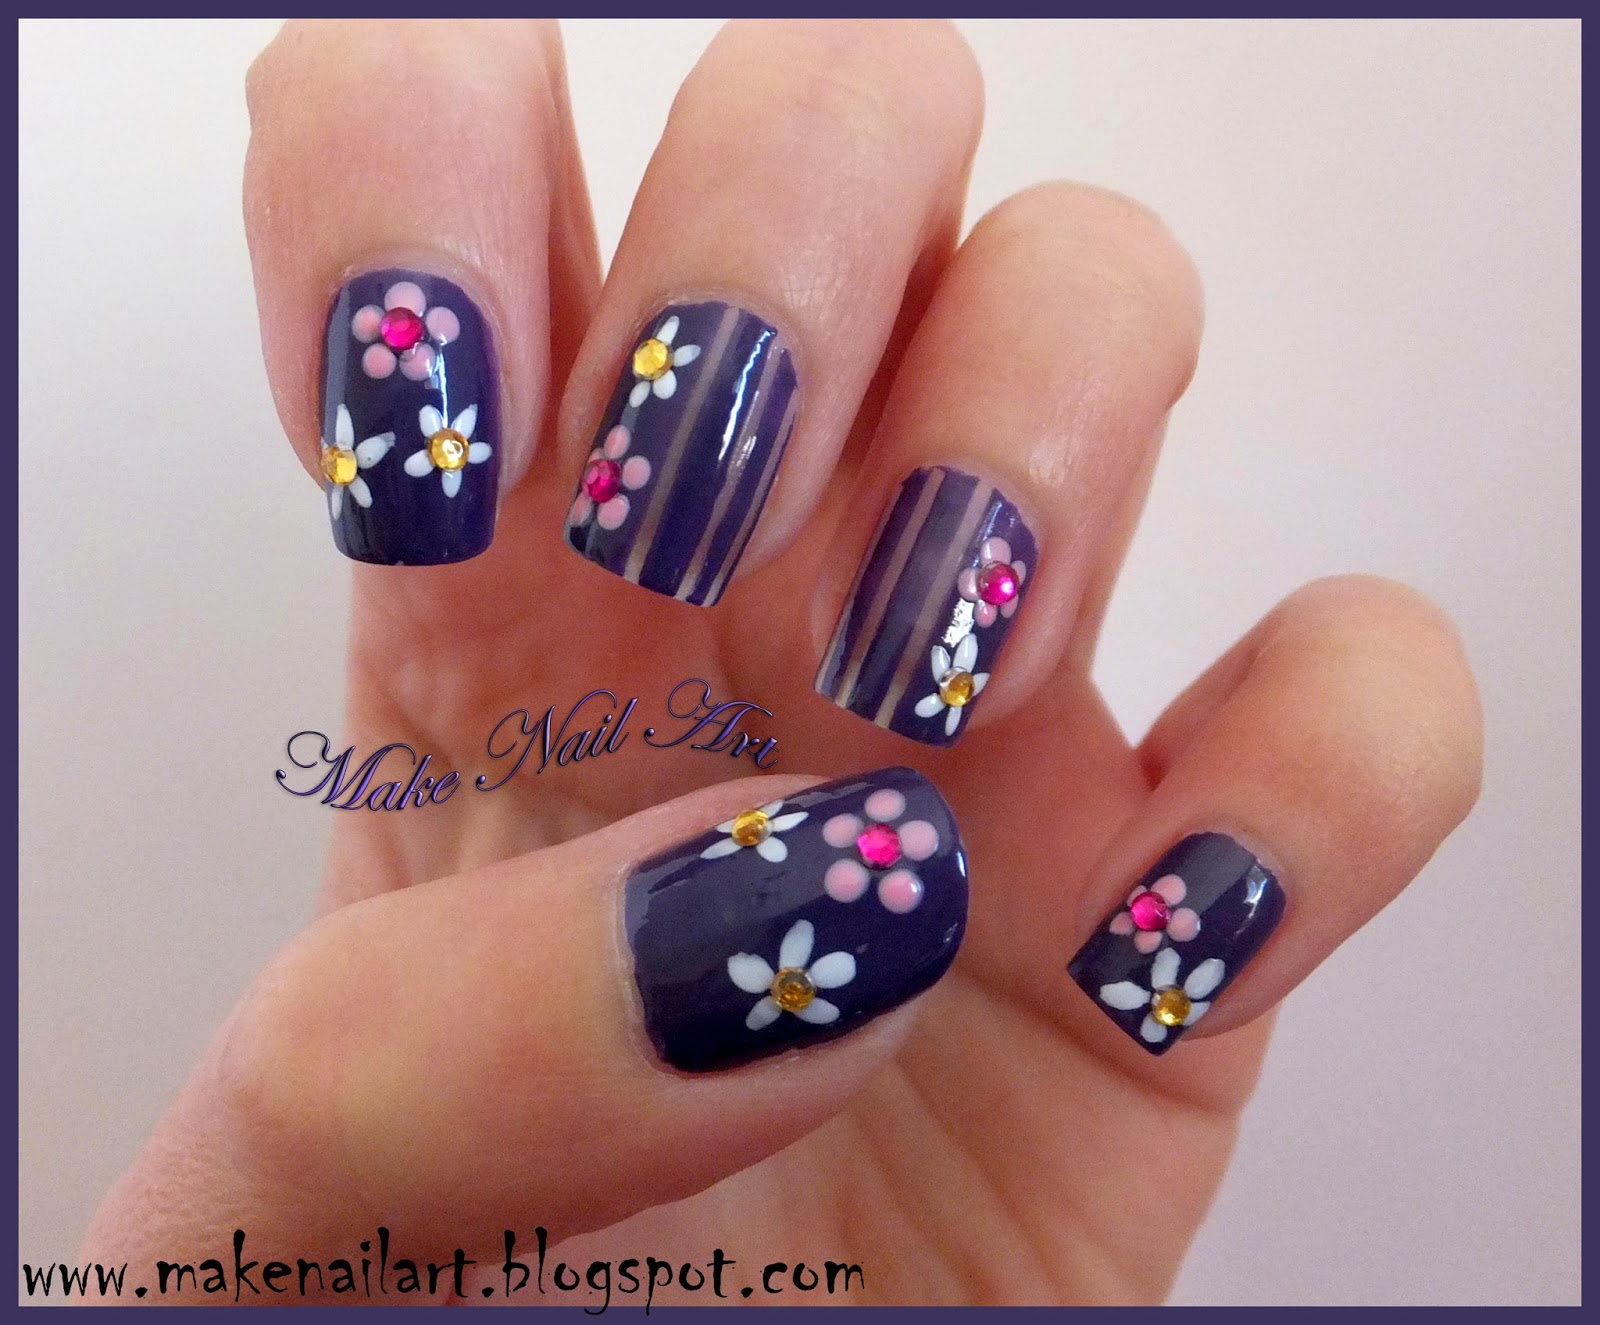 1. Floral Nail Art Designs for Spring - wide 6